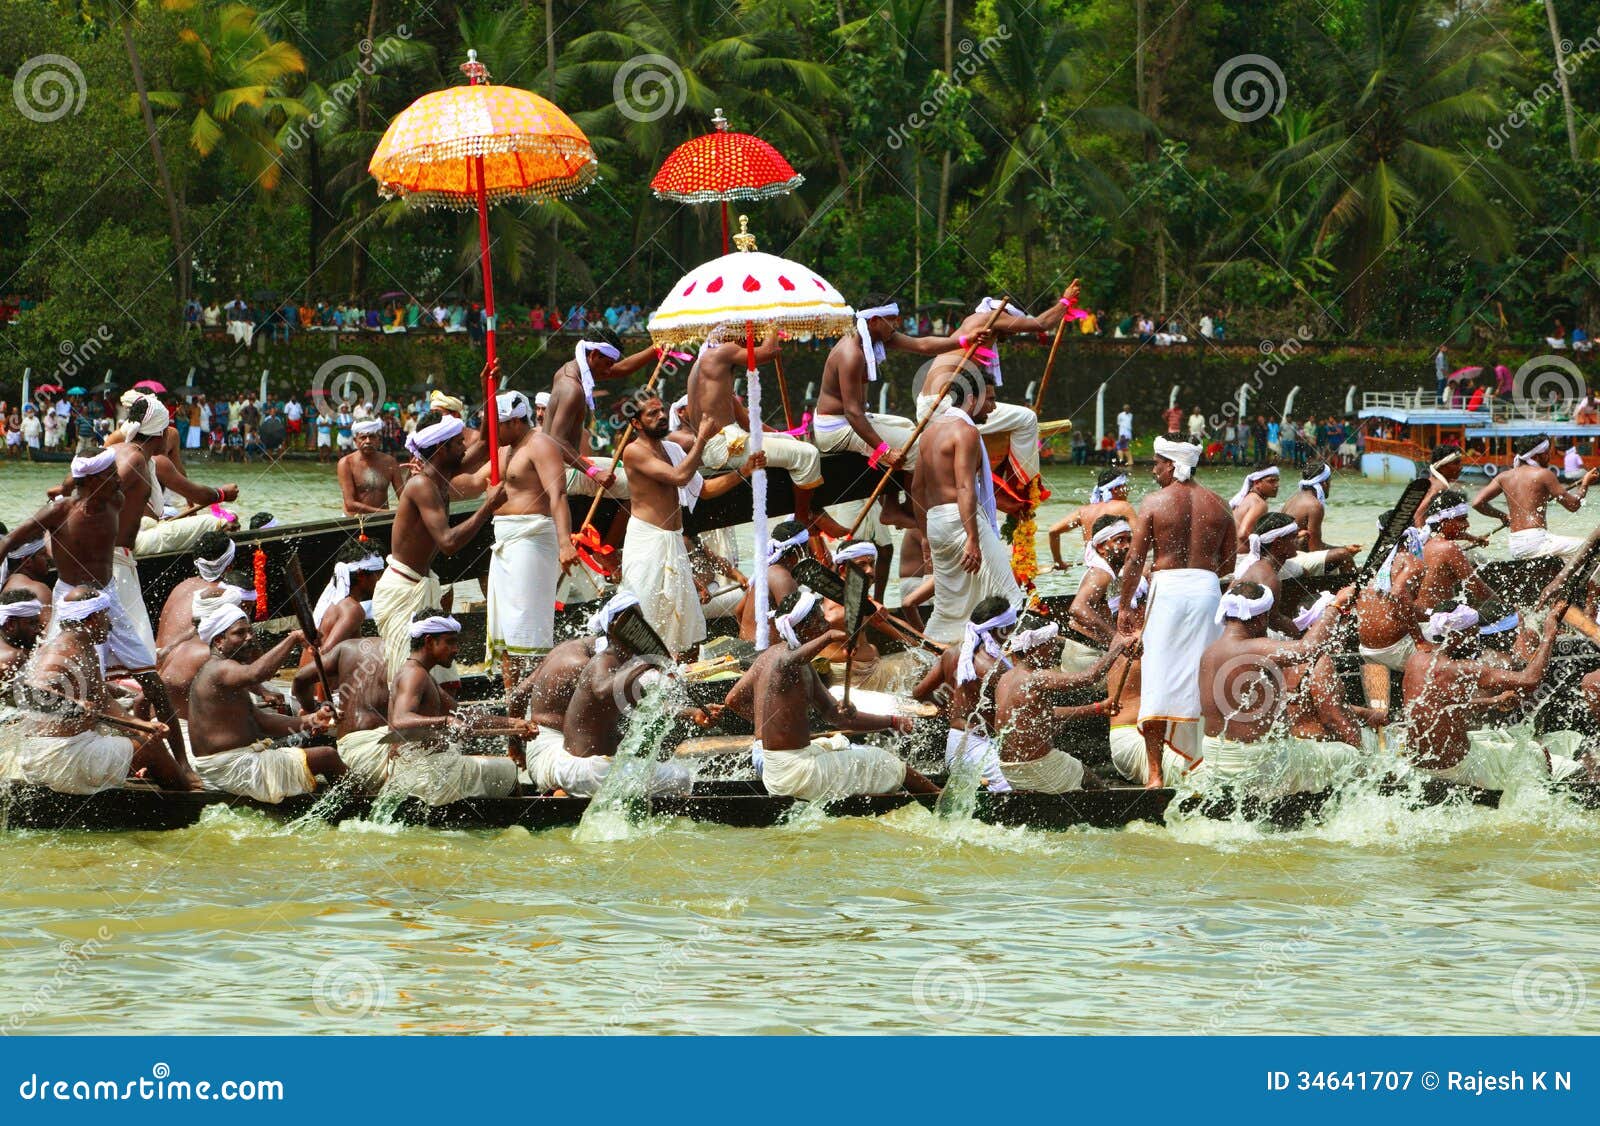 snake boat races of kerala editorial photography - image